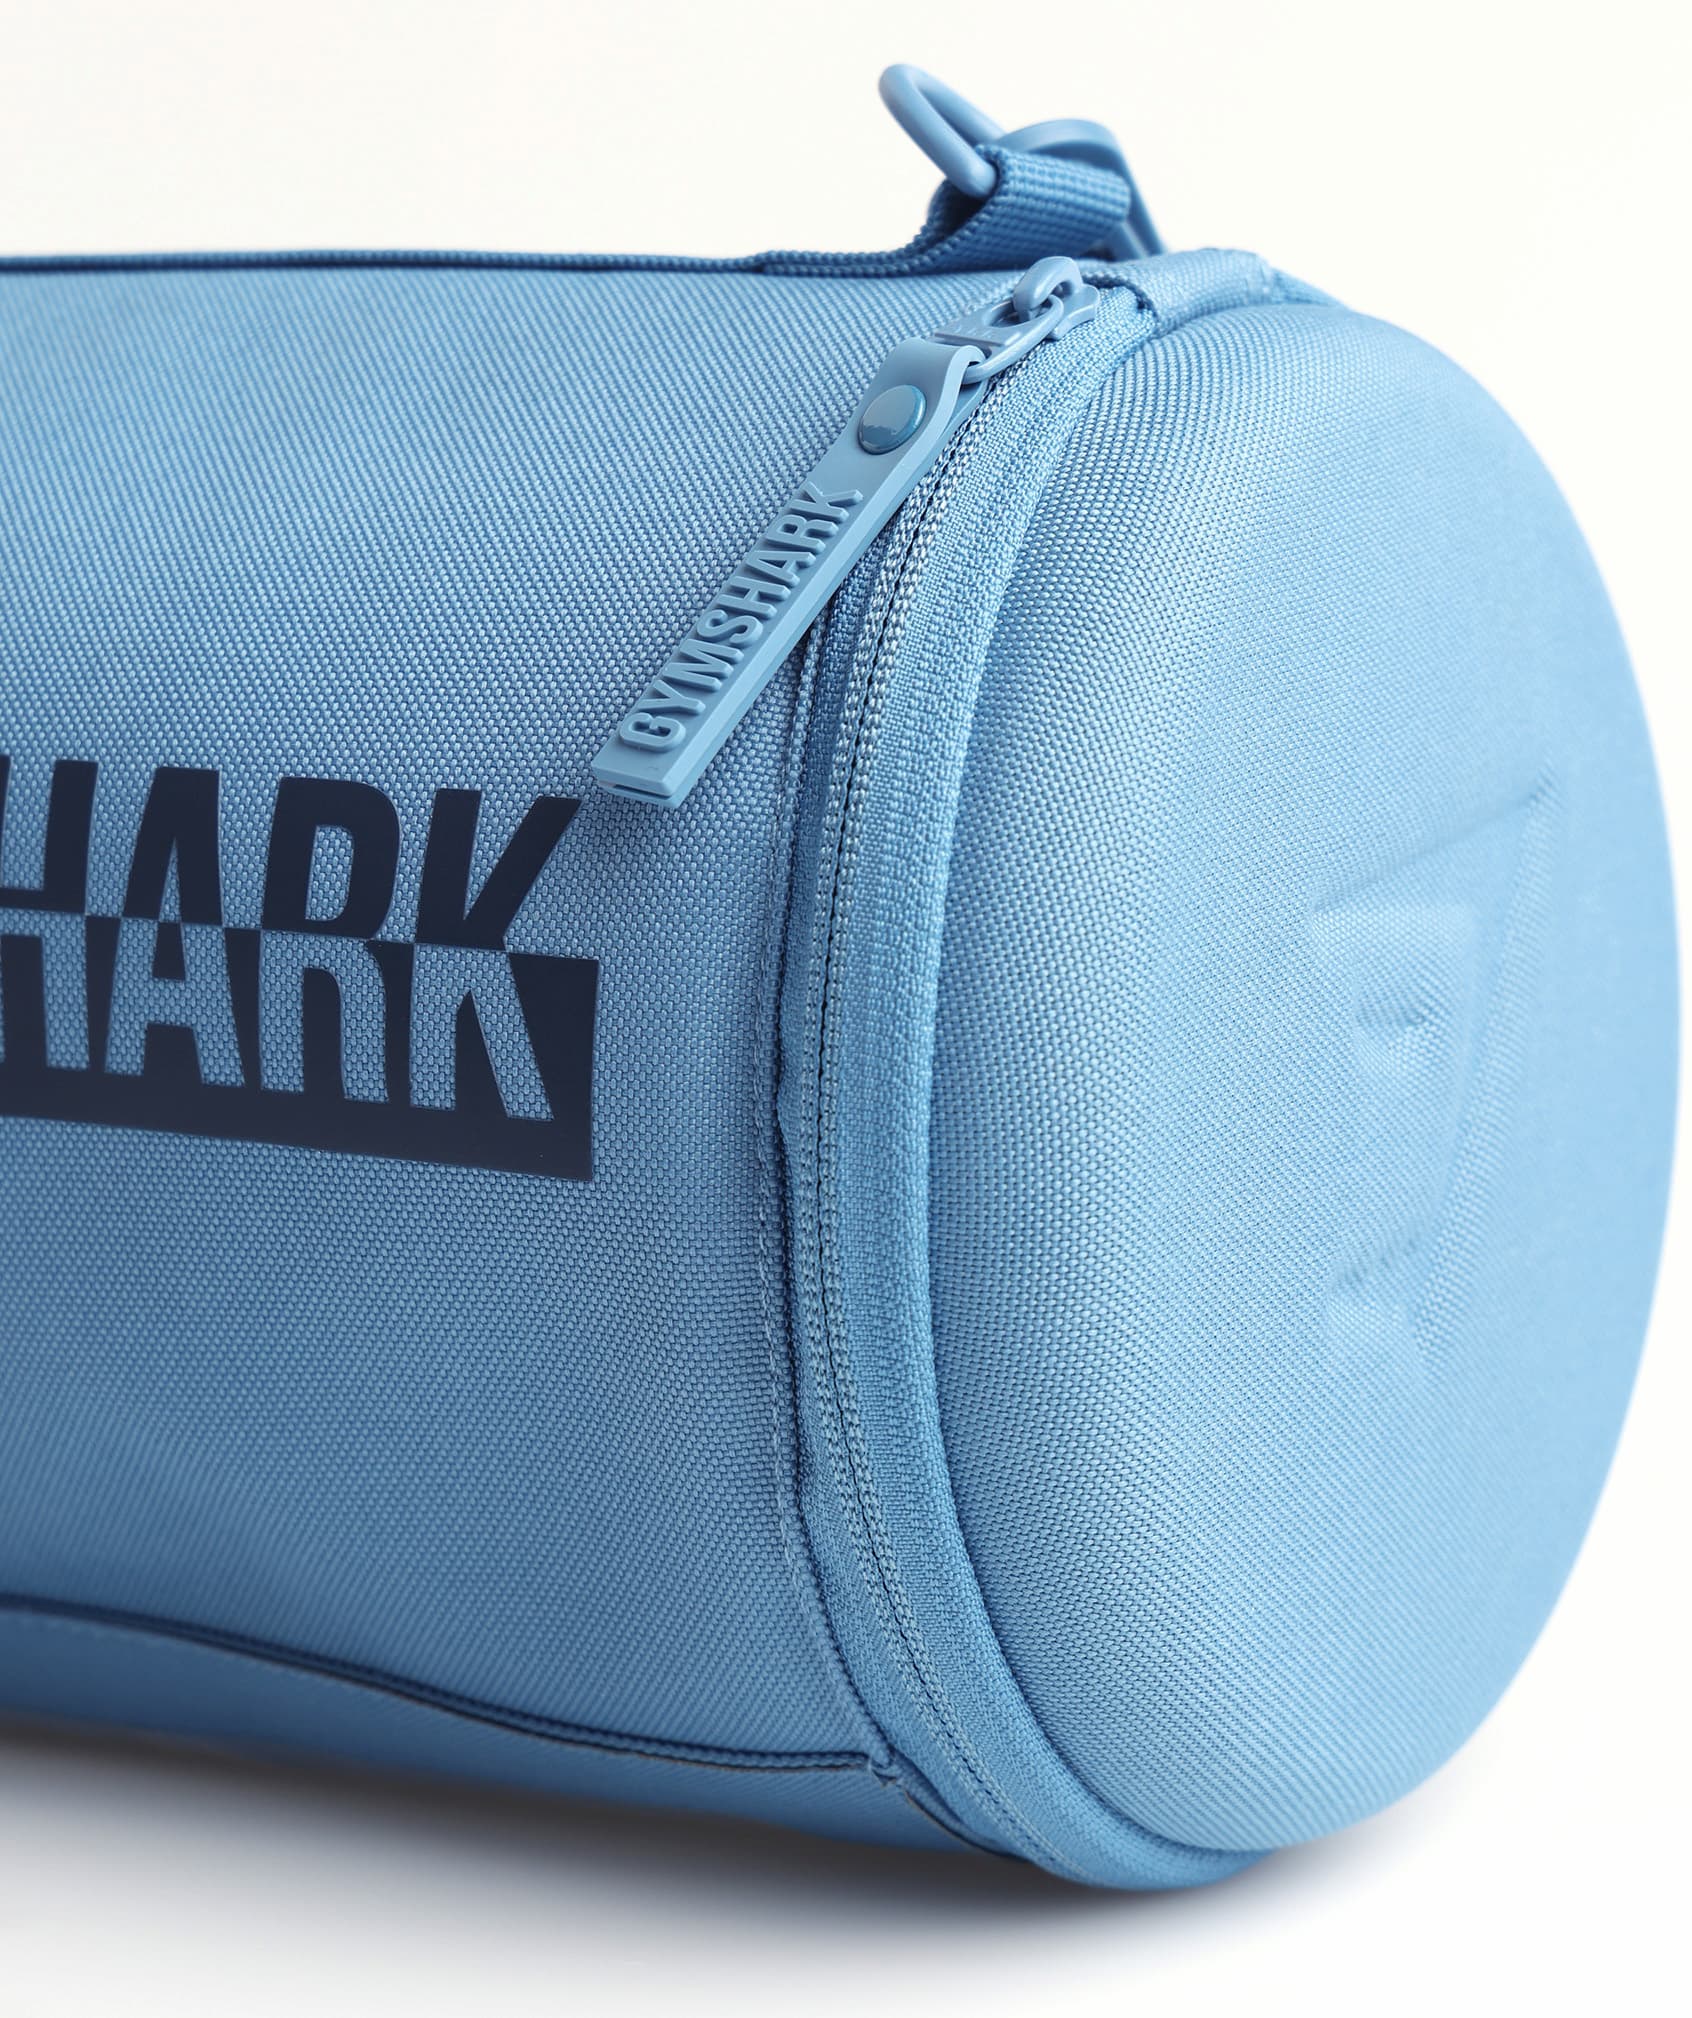 11 Of The Best Workout Bags For 2023